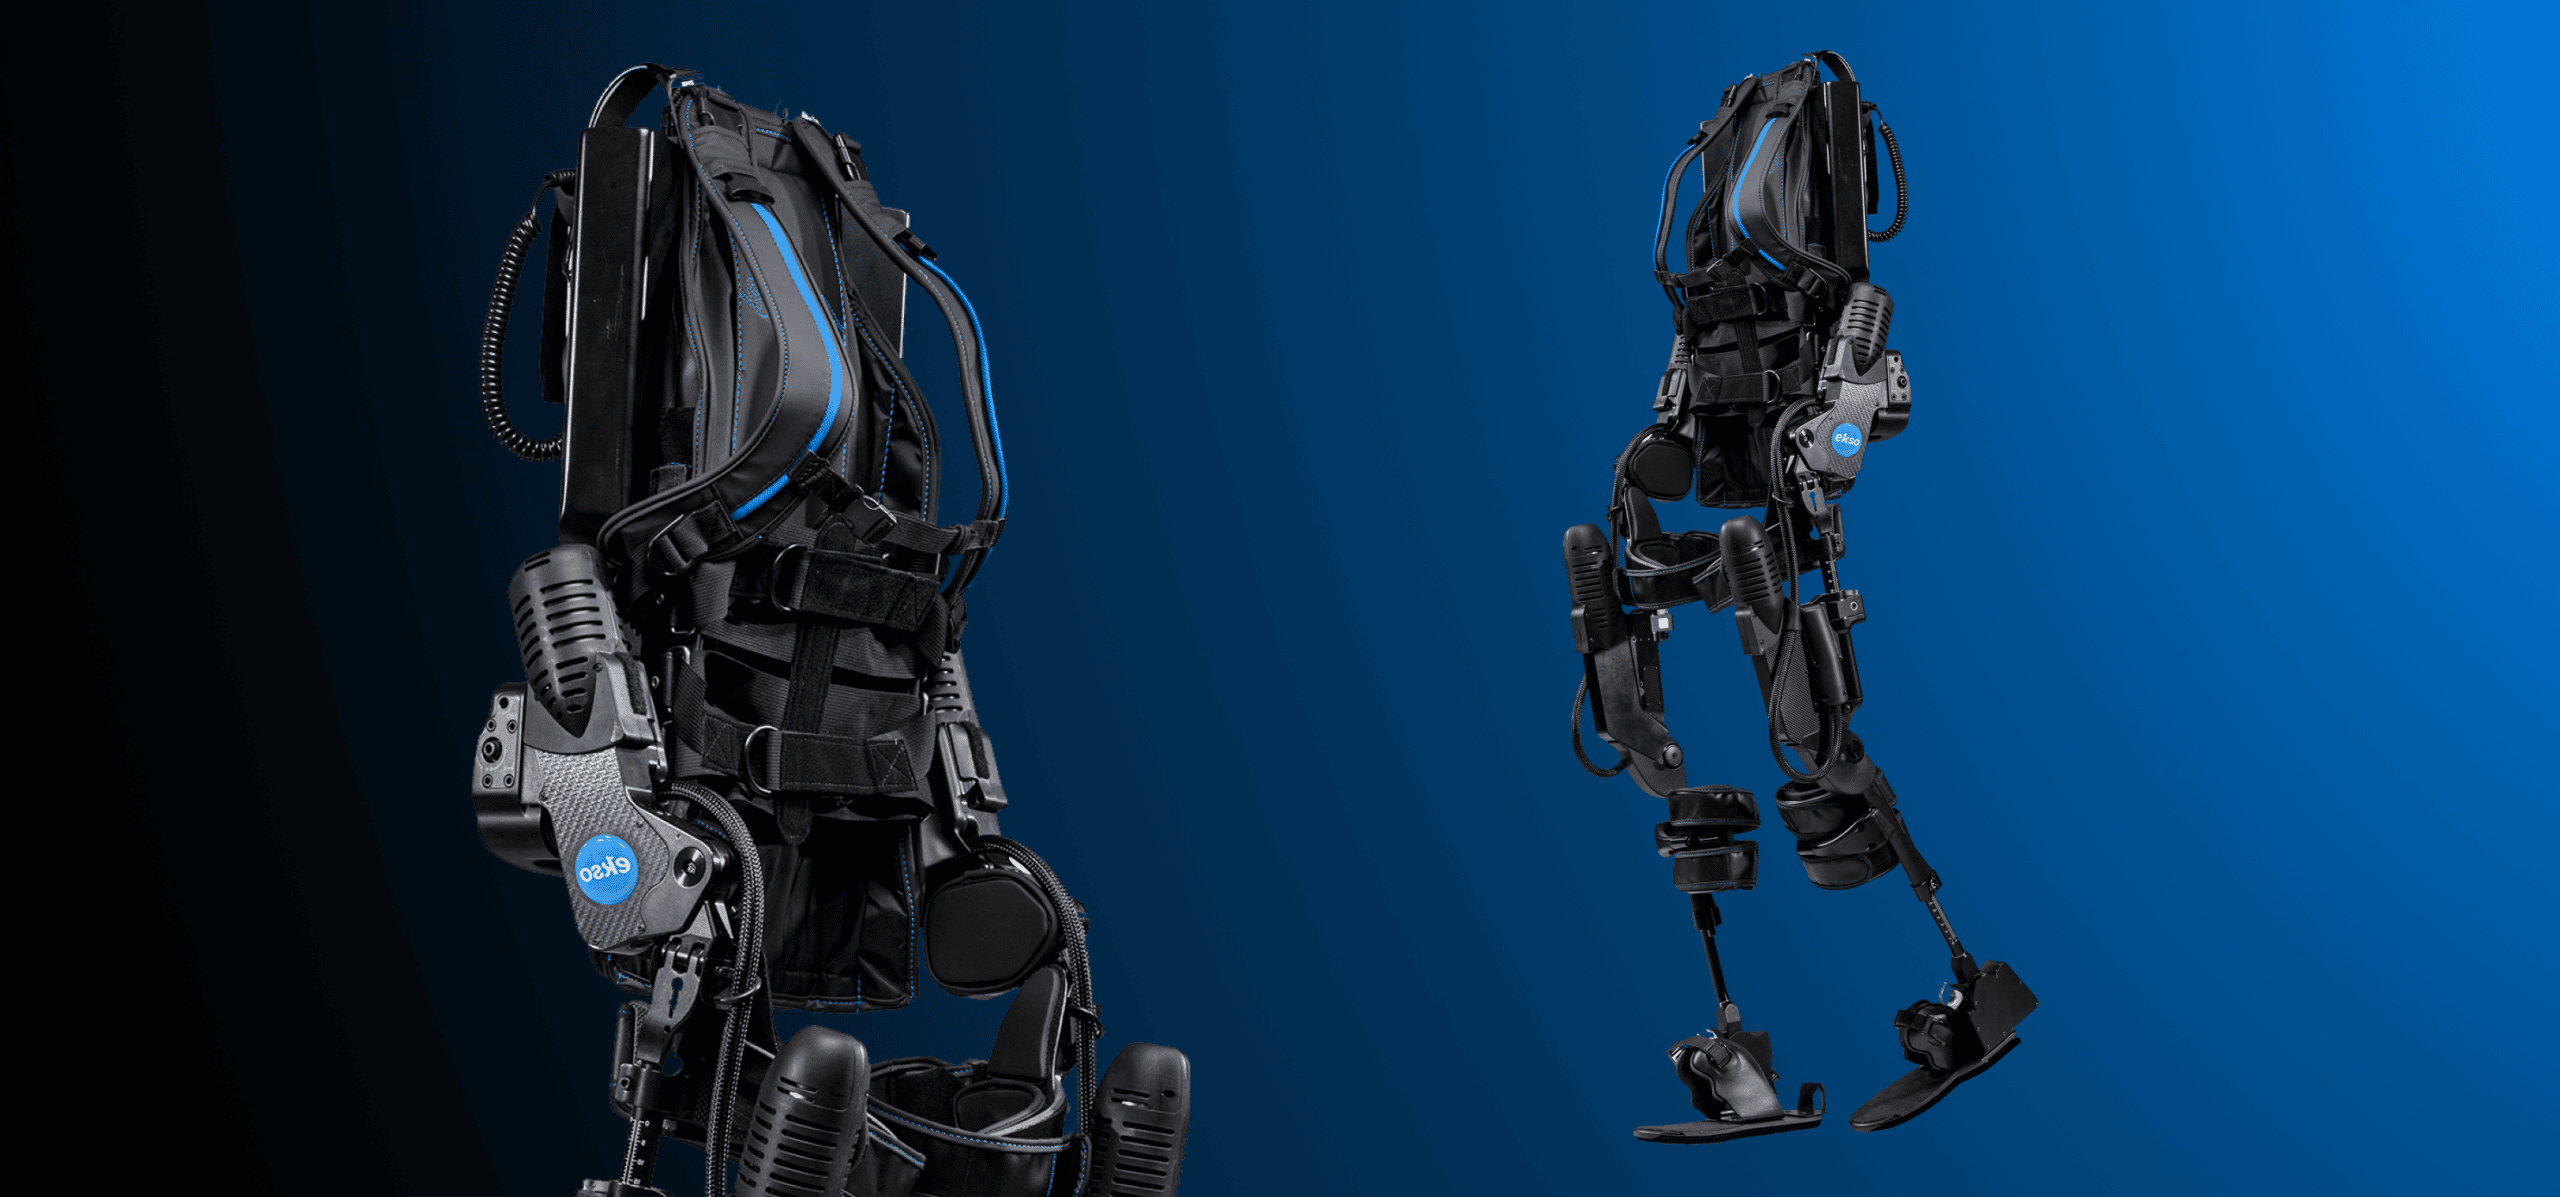 9 Must-Know Facts About Exoskeleton Suits